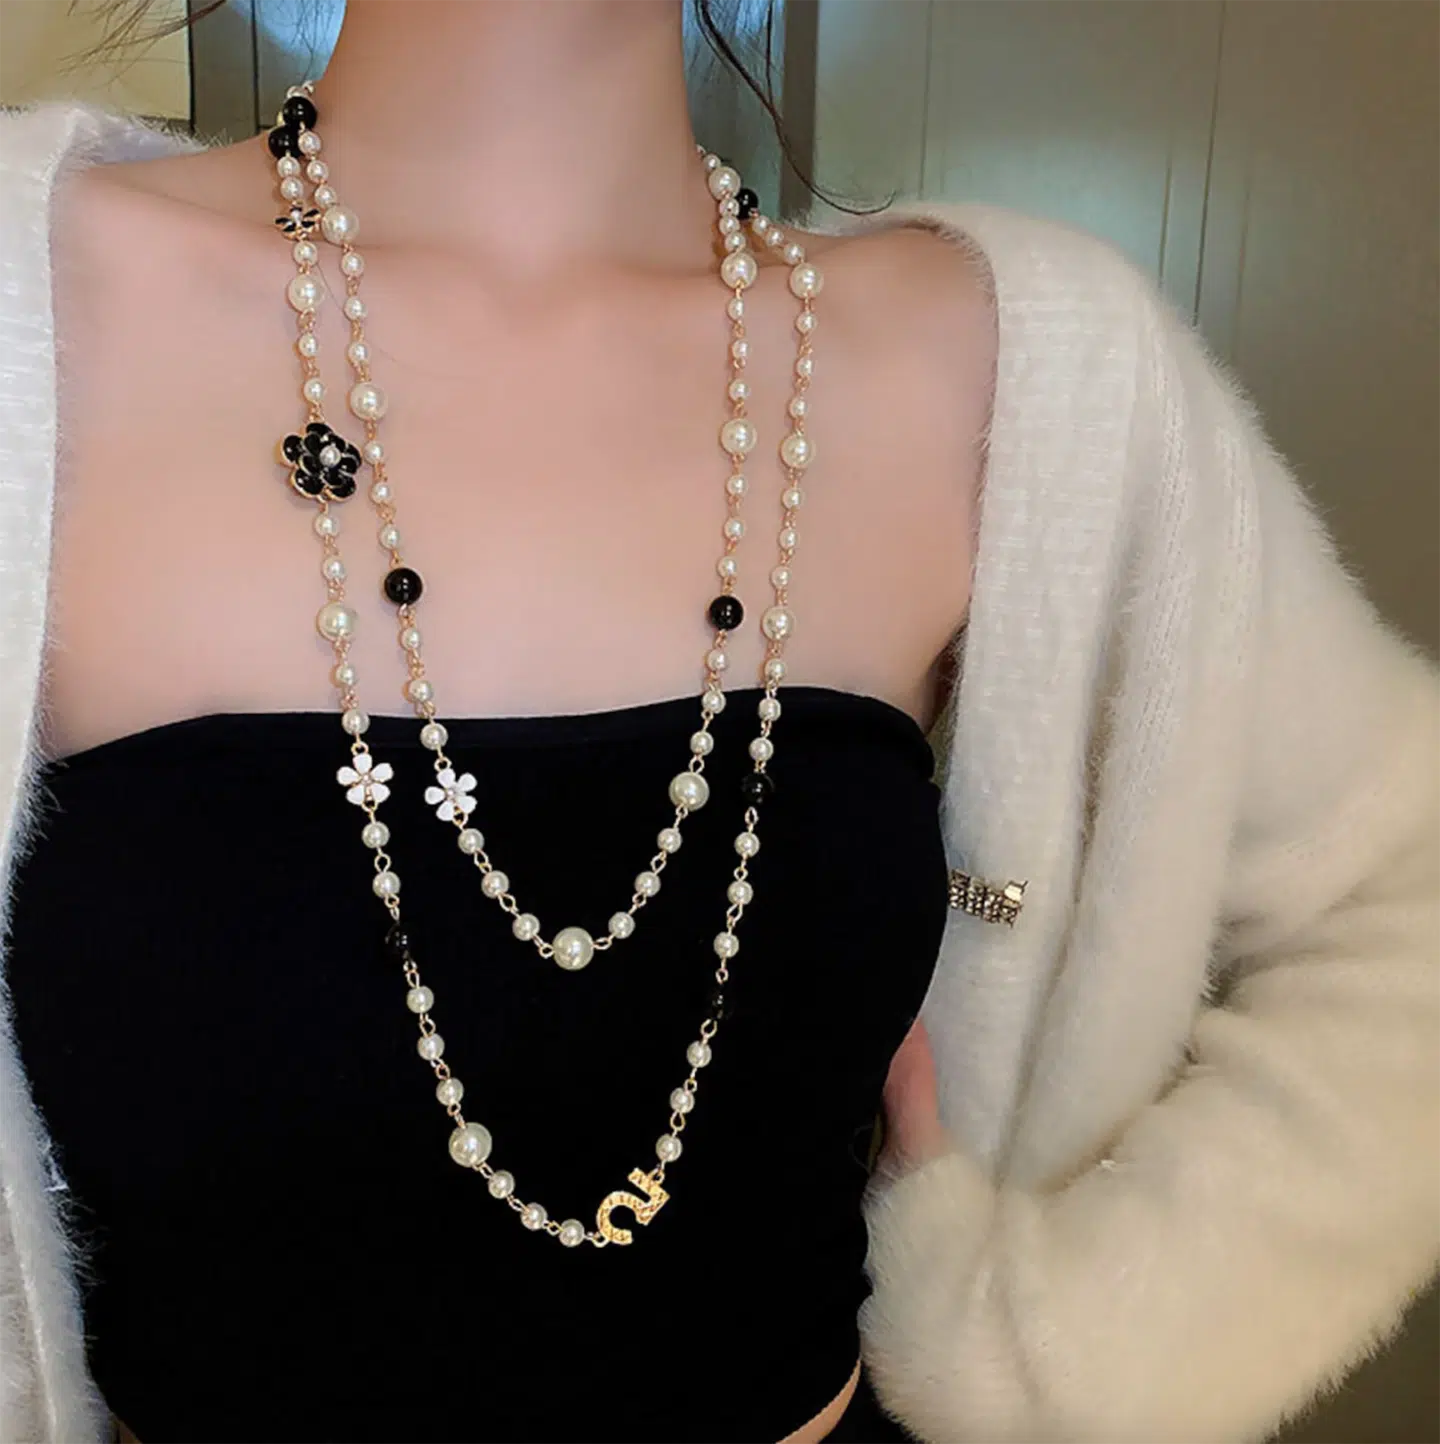 CHANEL Graduated Pearl Crystal CC Long Necklace Light Gold 204446